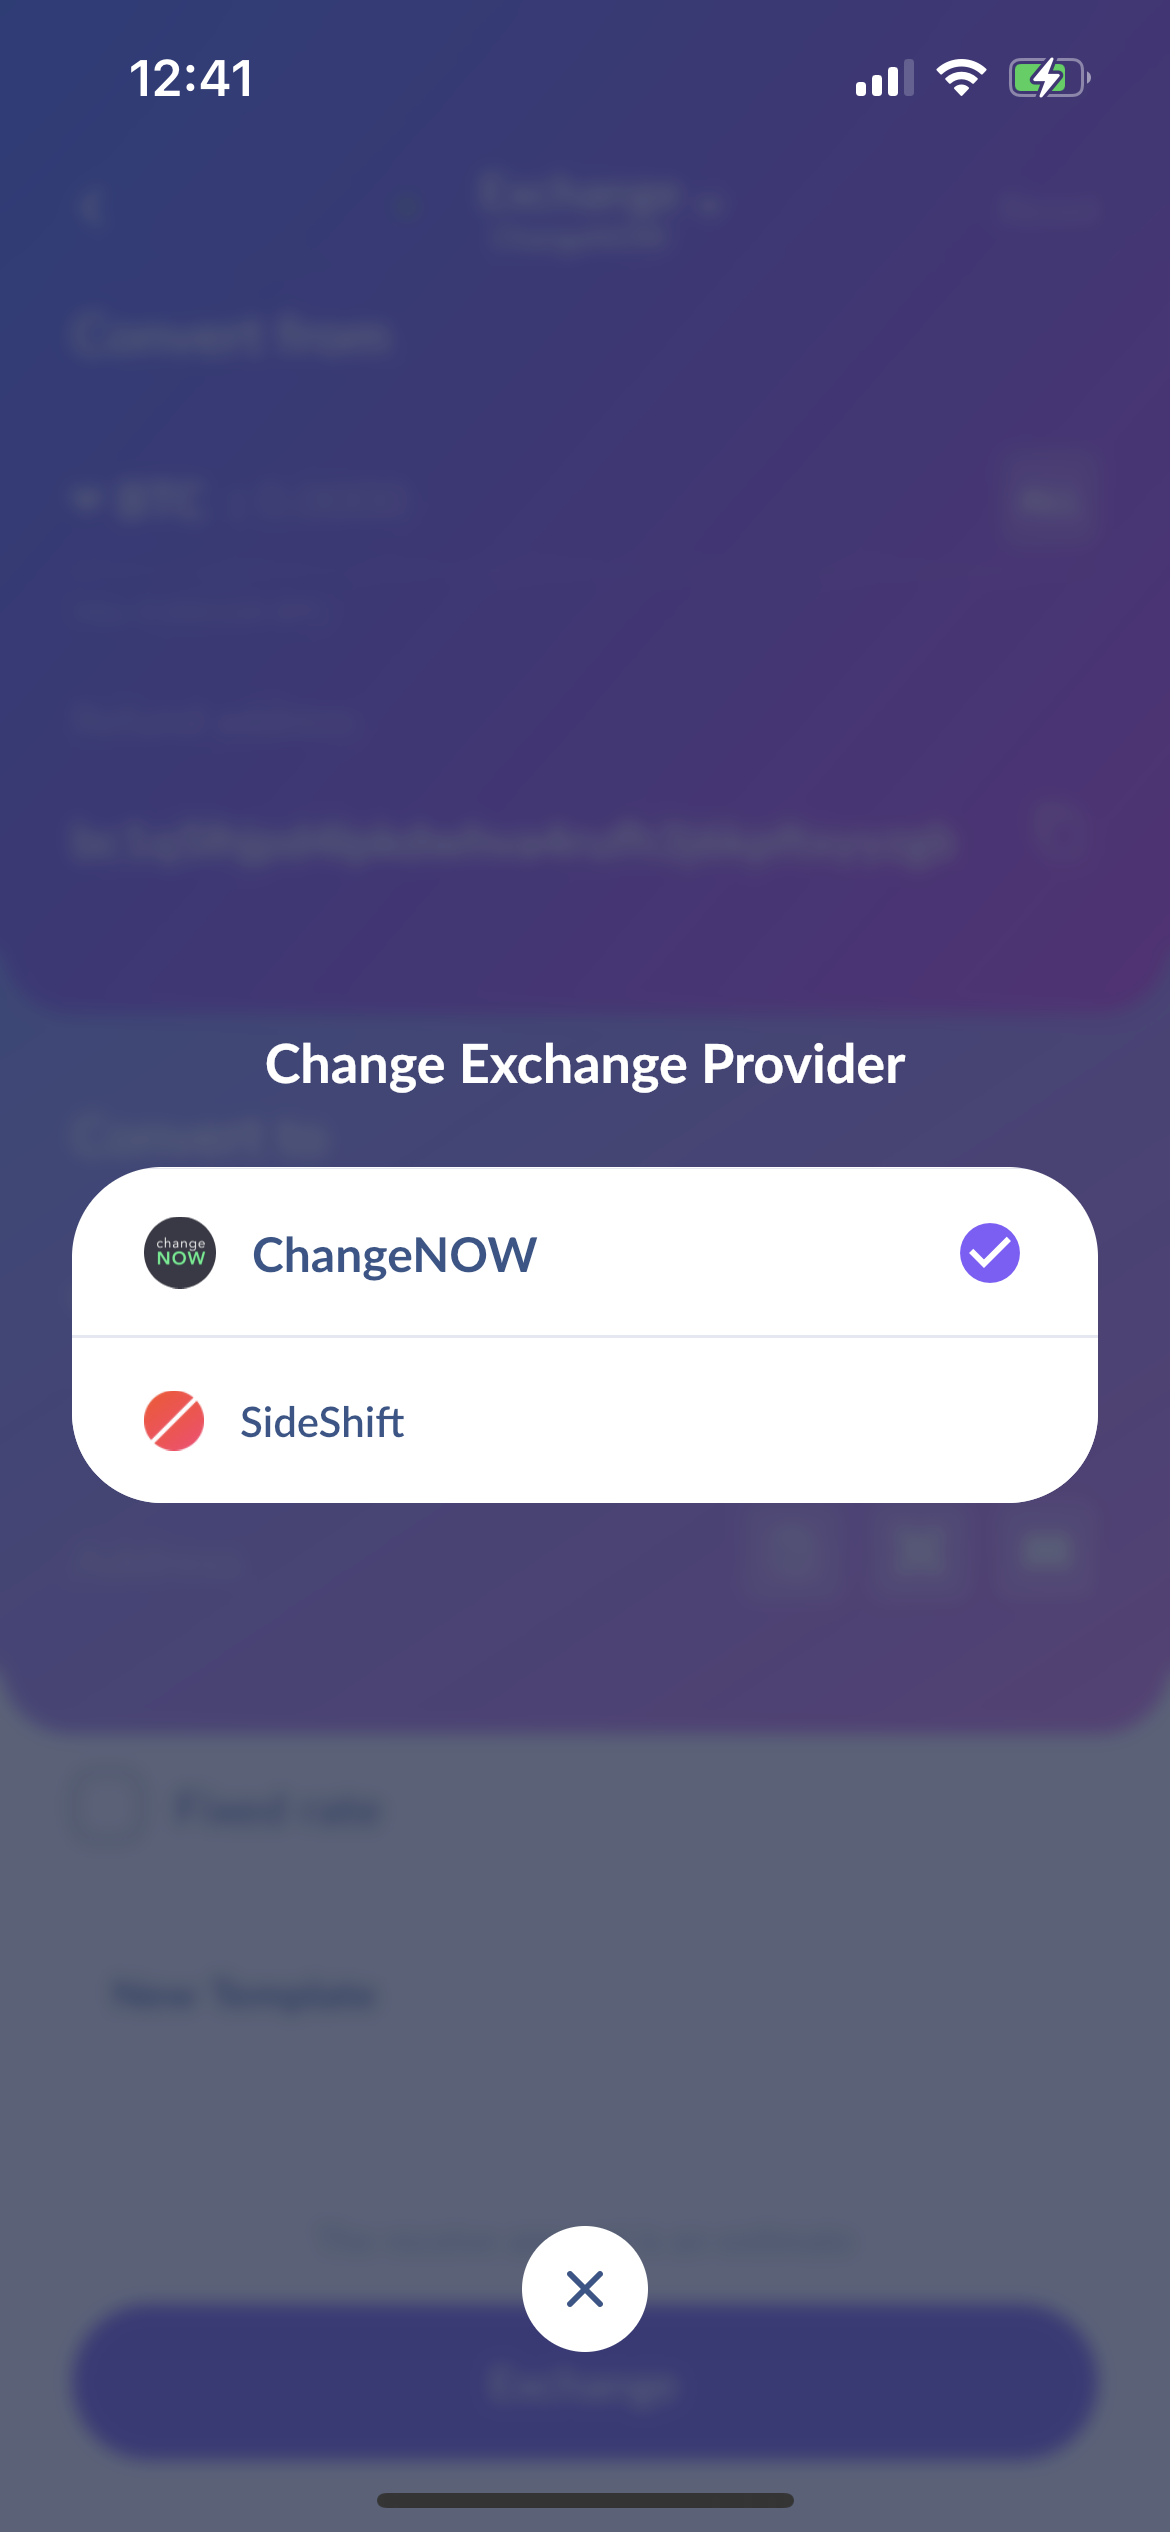 Optionally change exchange provider from available options